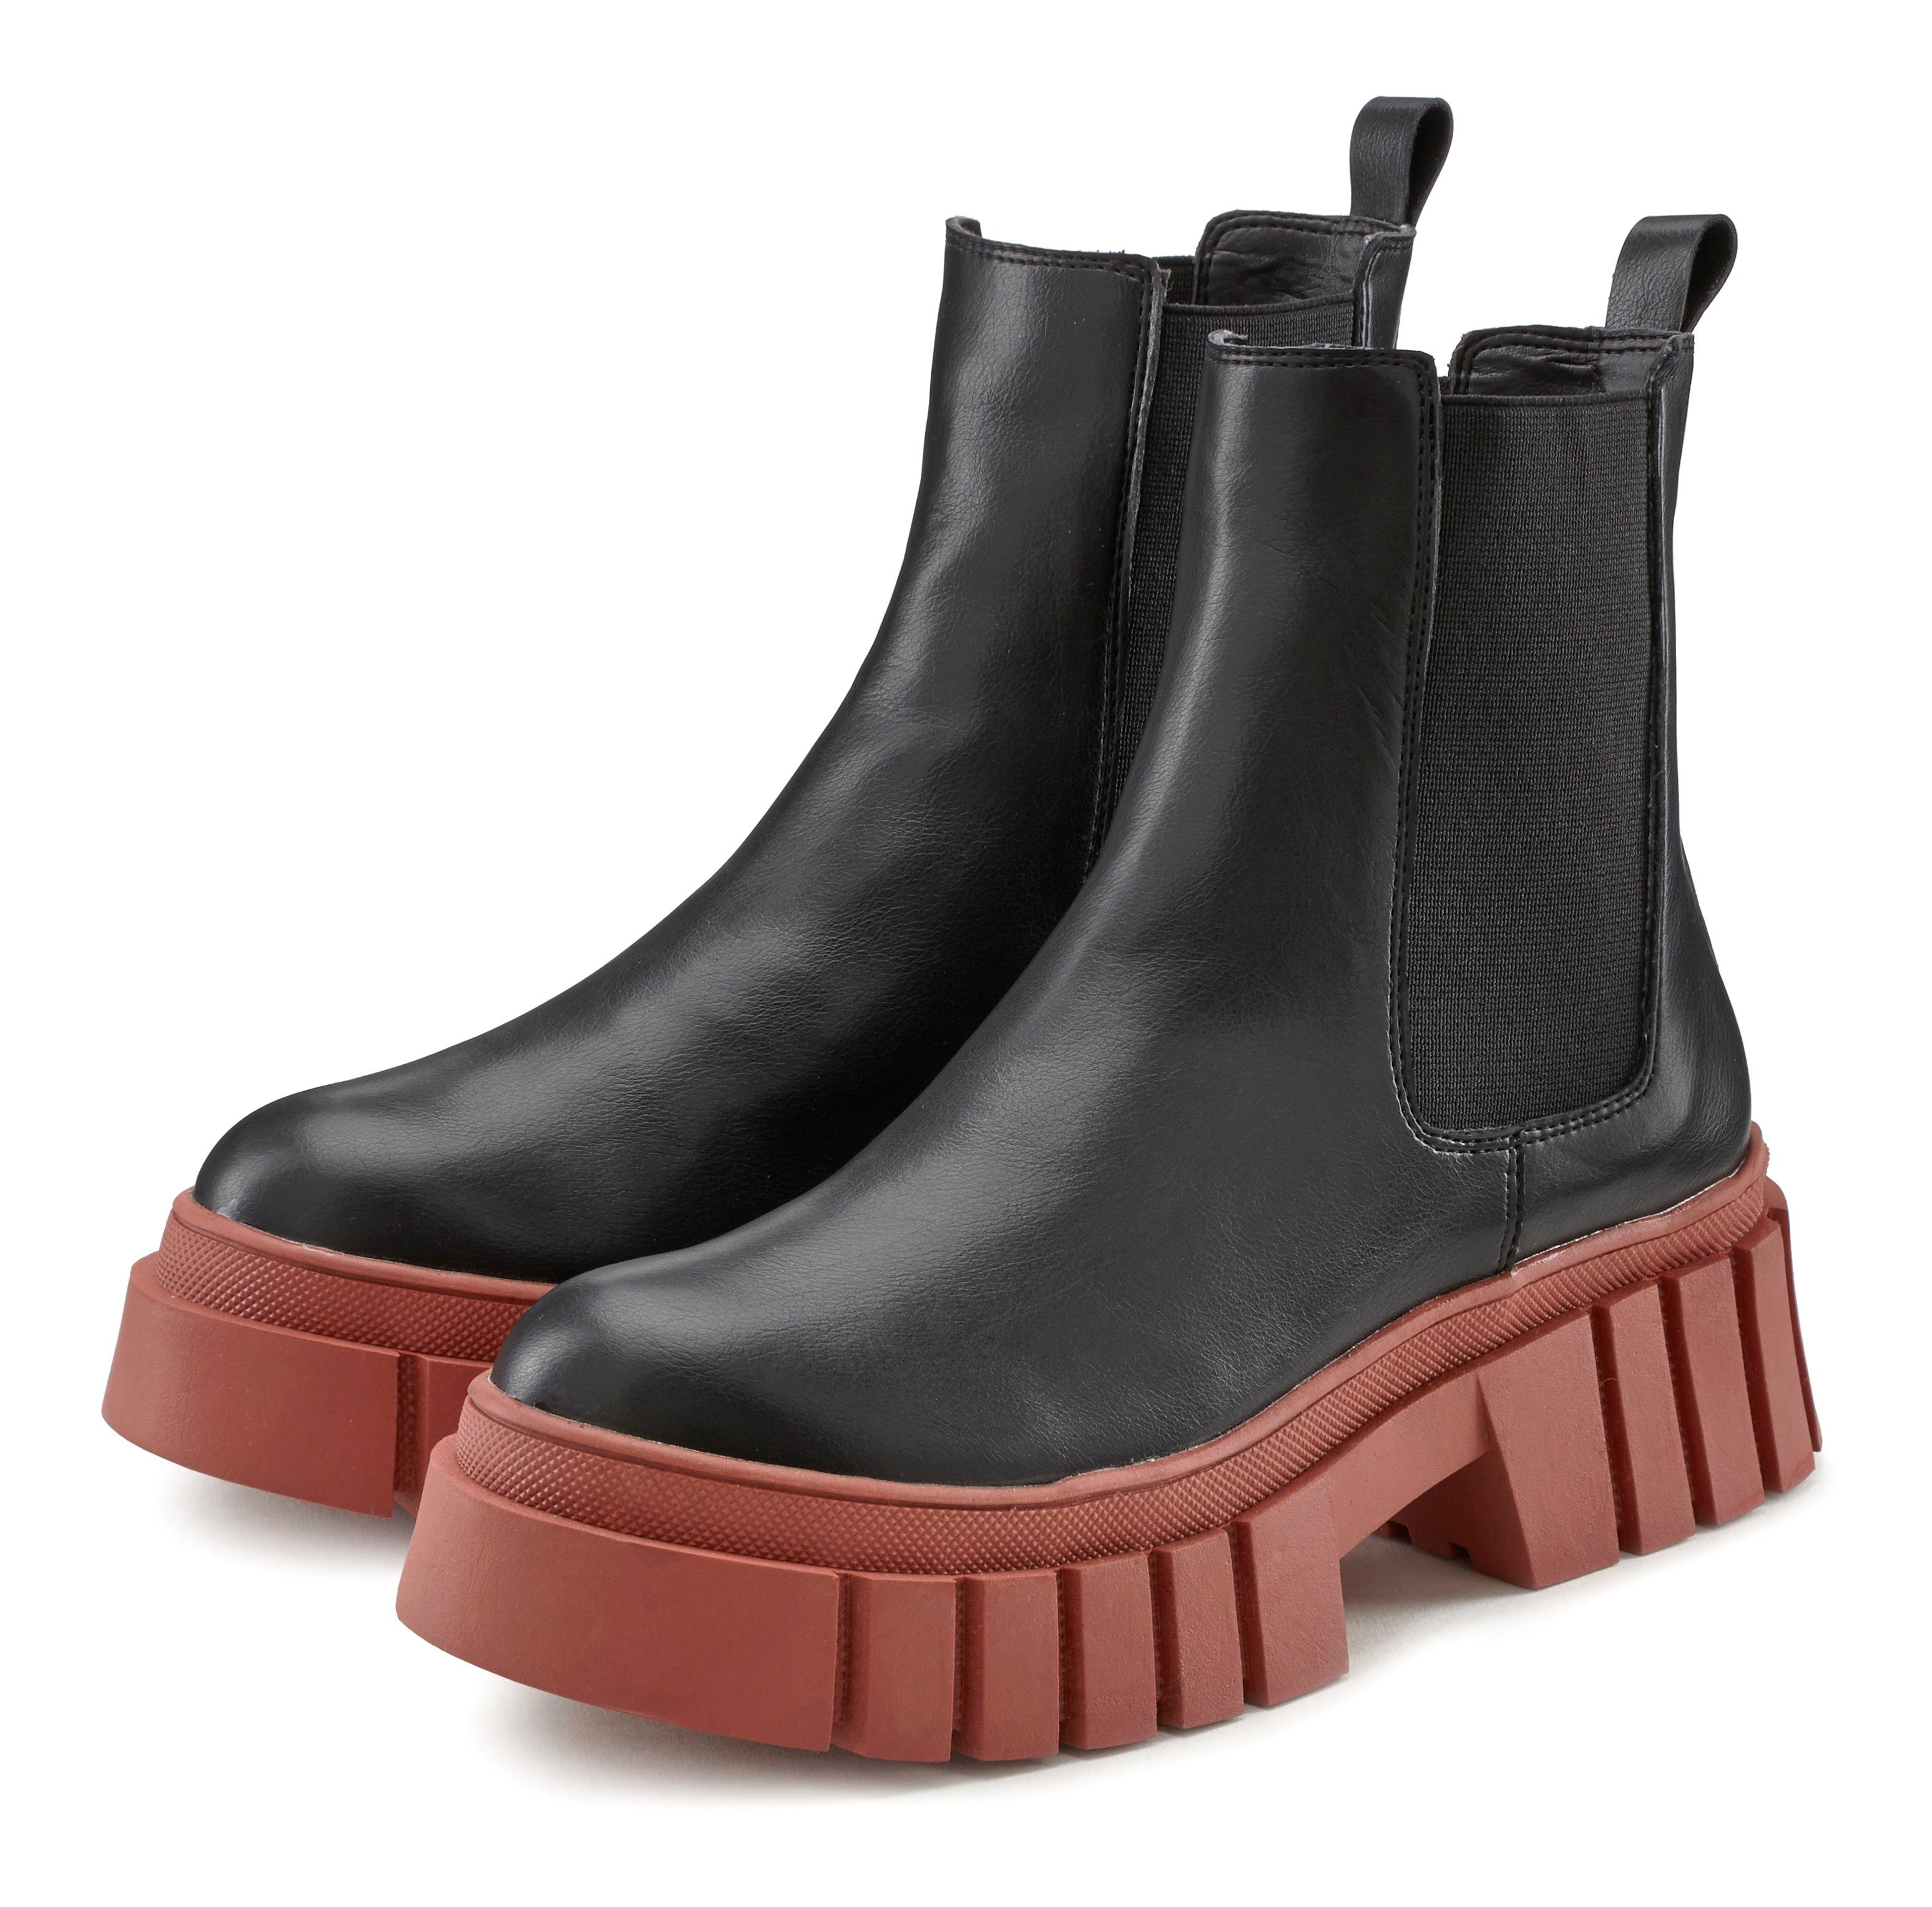 LASCANA Chelseaboots mit Chunky Sohle im trendigen Farbmix,  Plateaustiefelette, Ankle Boots